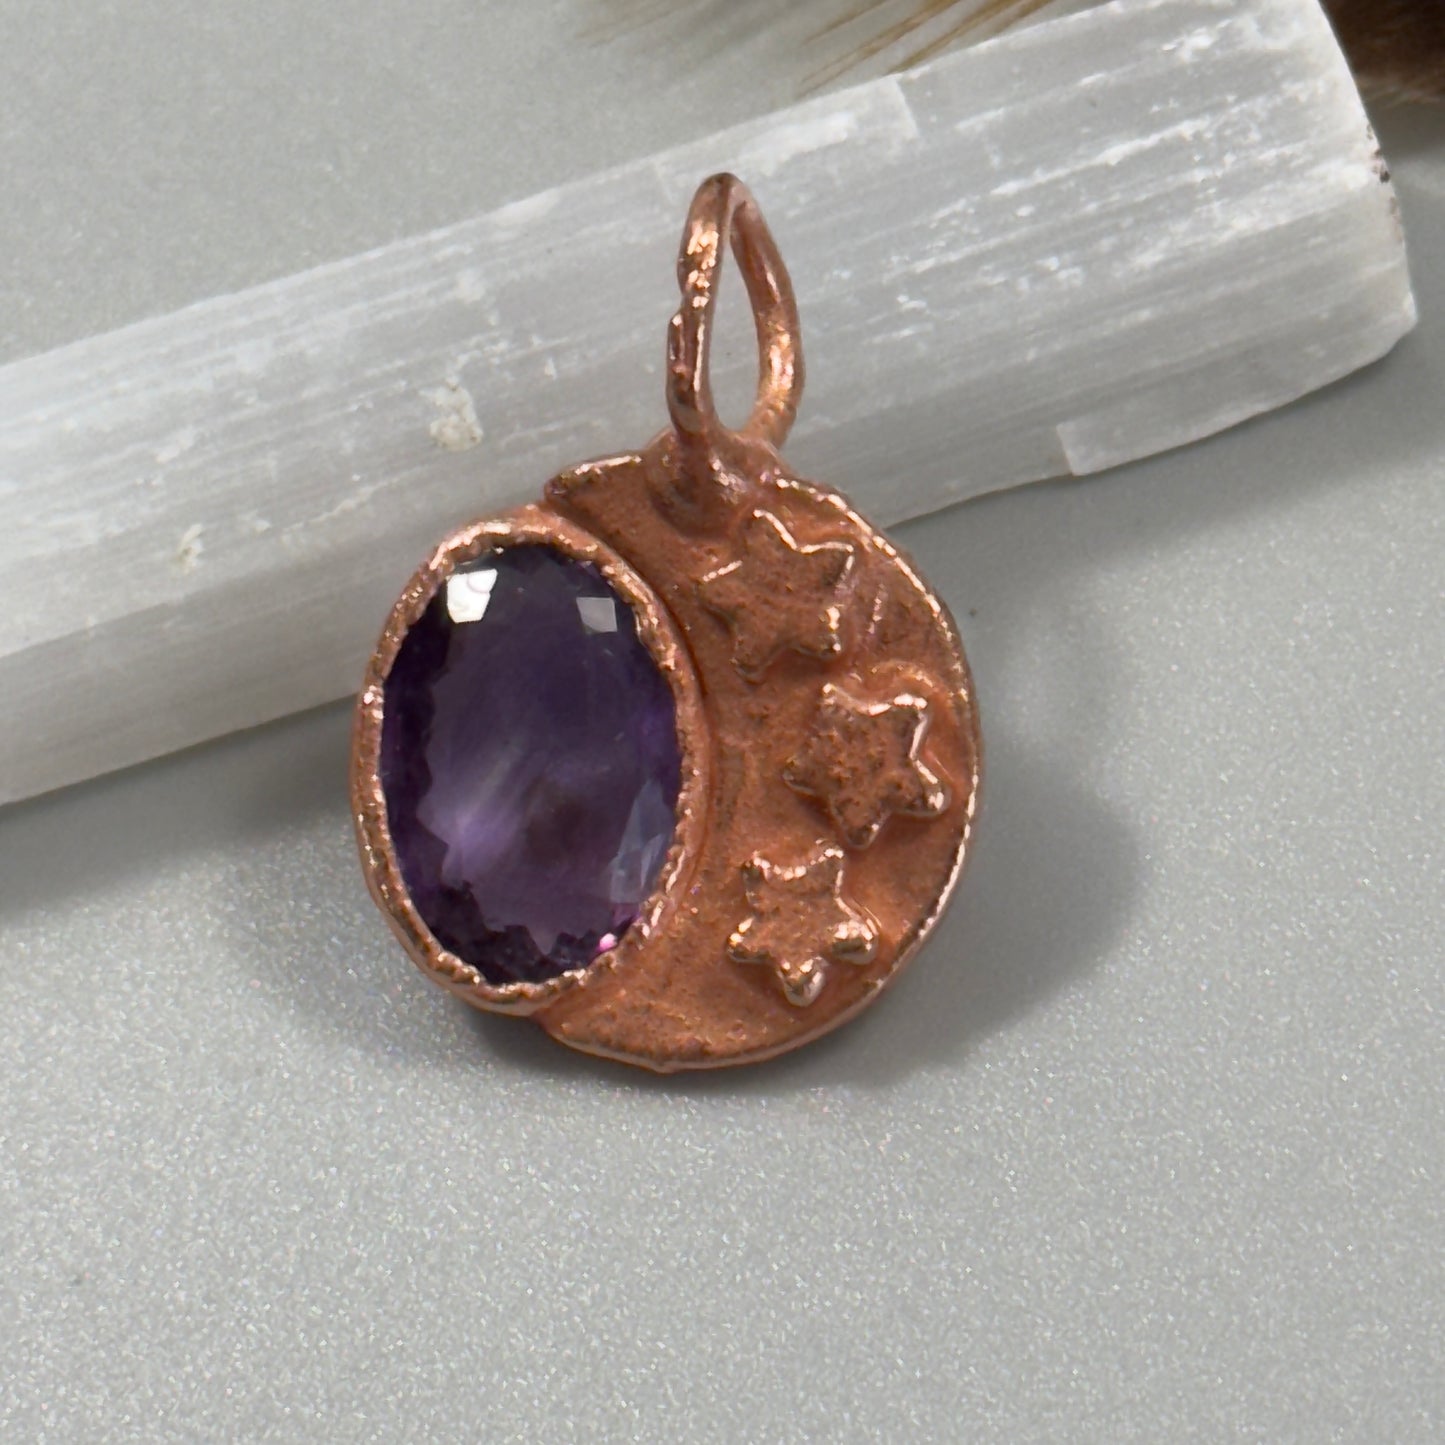 Faceted purple amethyst crystal with a copper moon necklace